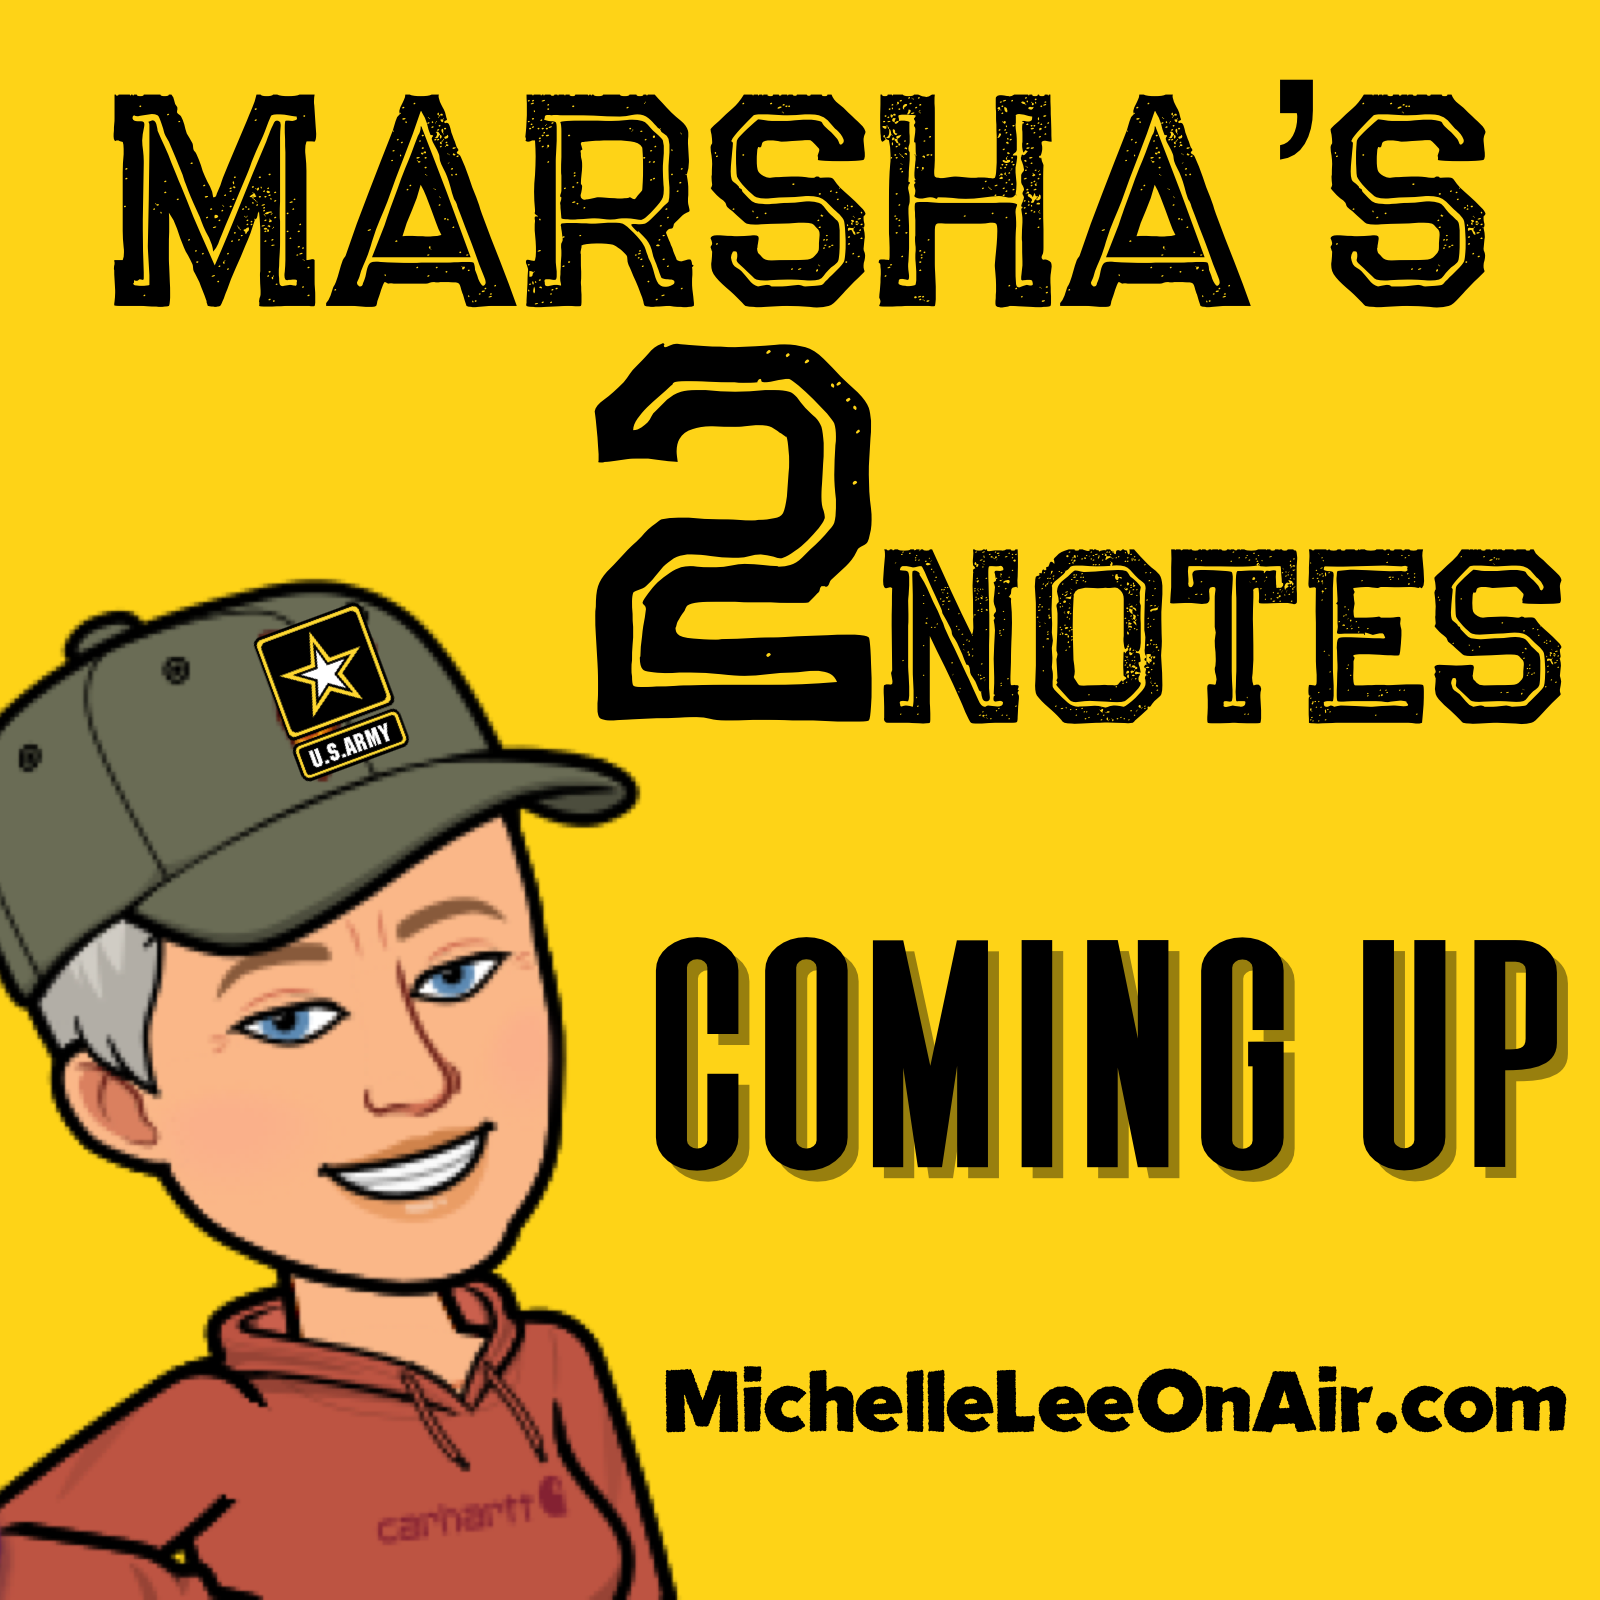 Art for Marsha's 2 Notes - 10am Wednesday & 12pm Saturday  by www.MichelleLeeOnAir.com